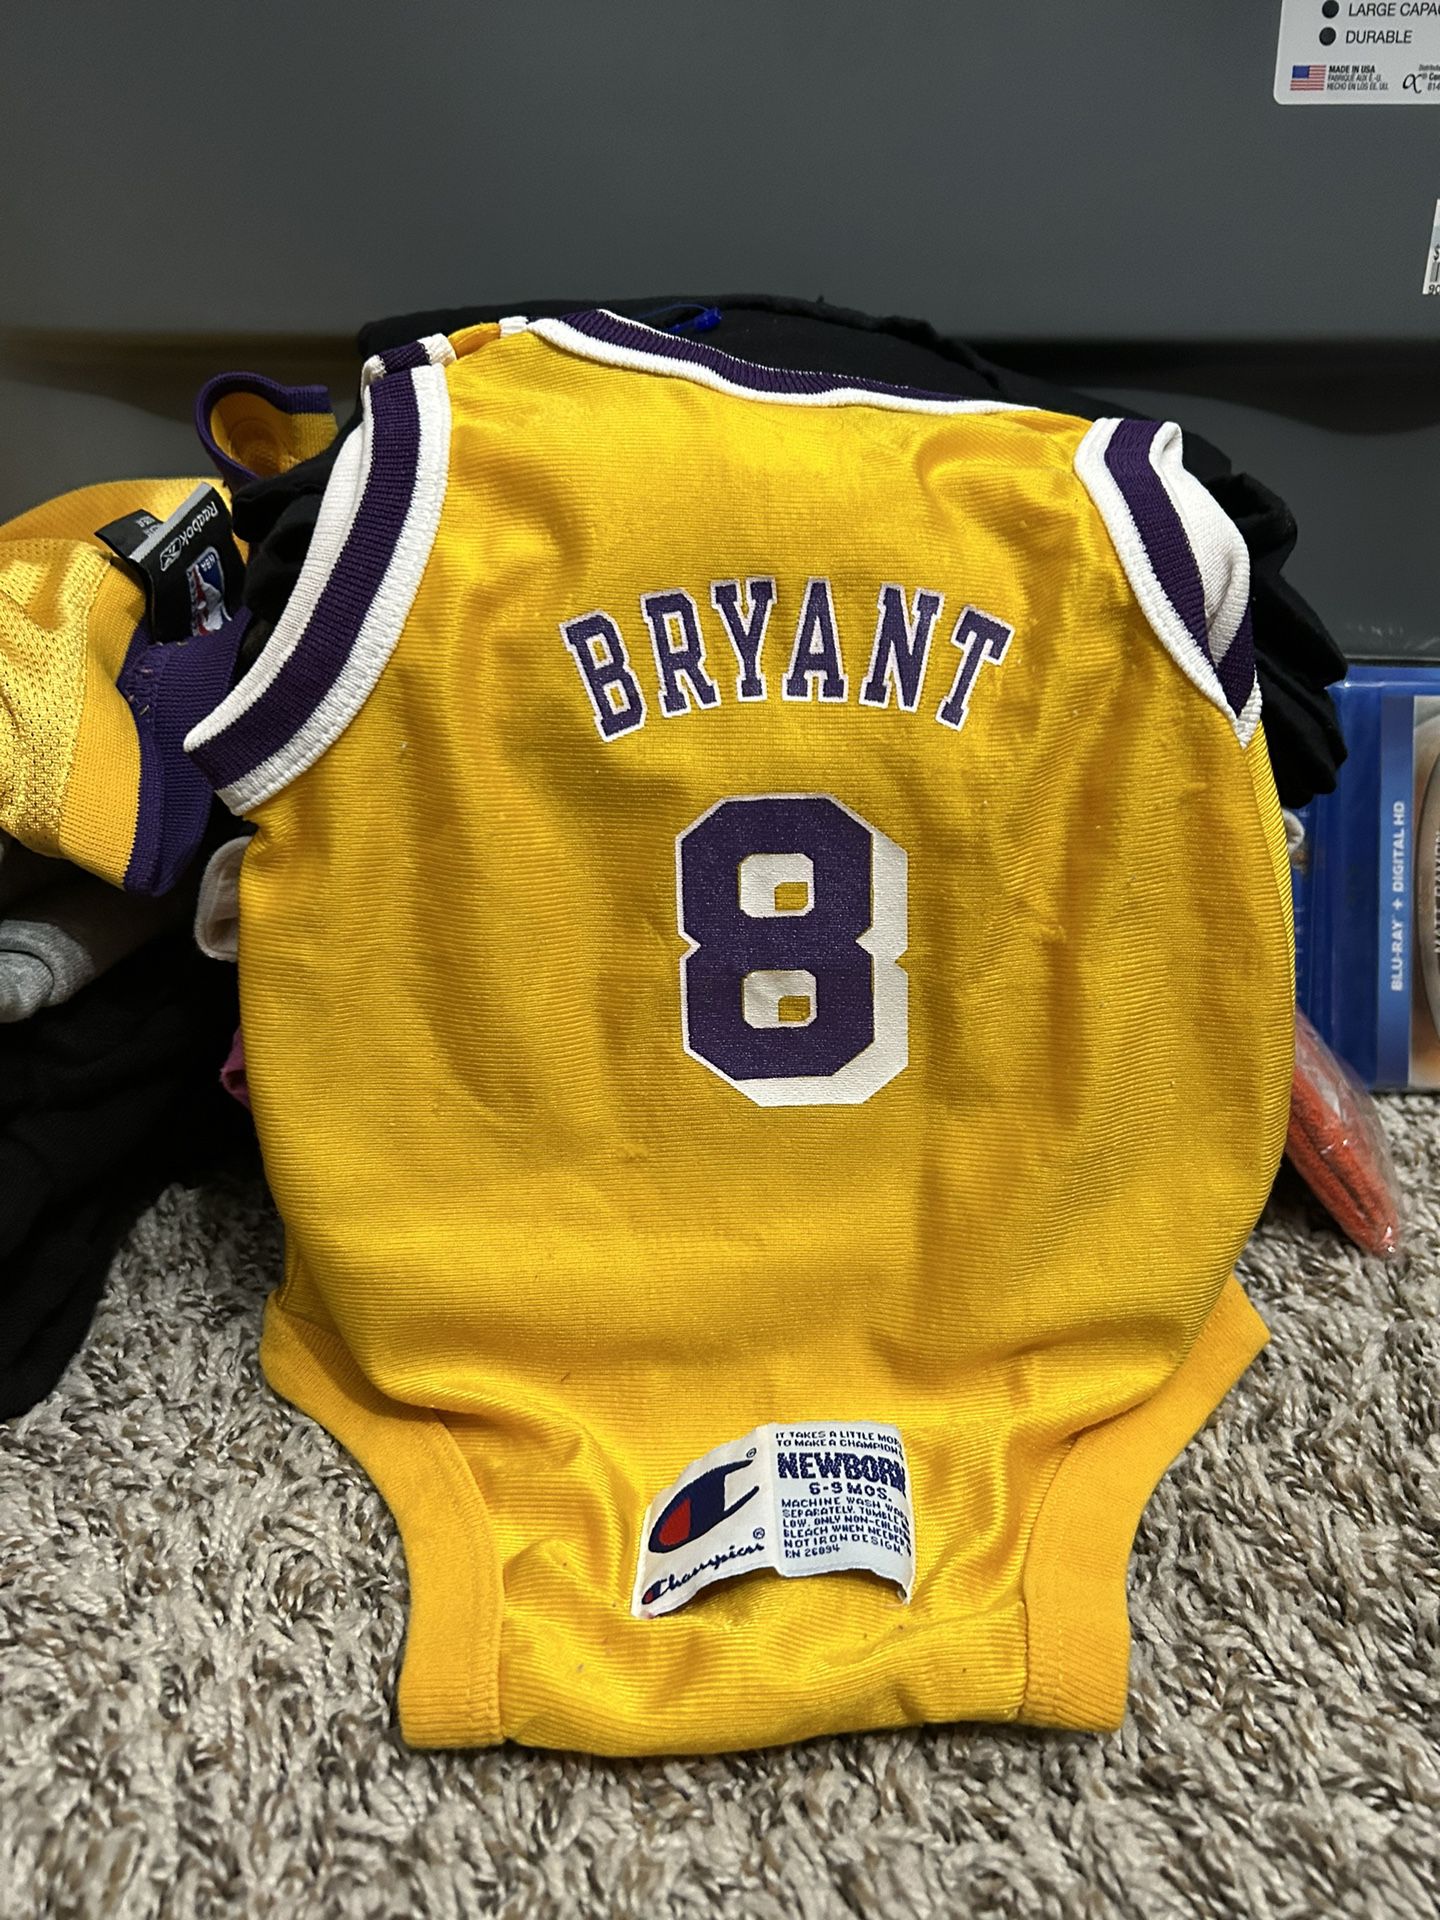 Kobe Bryant Onesie And Shaq Jersey Size 4t for Sale in Santa Ana